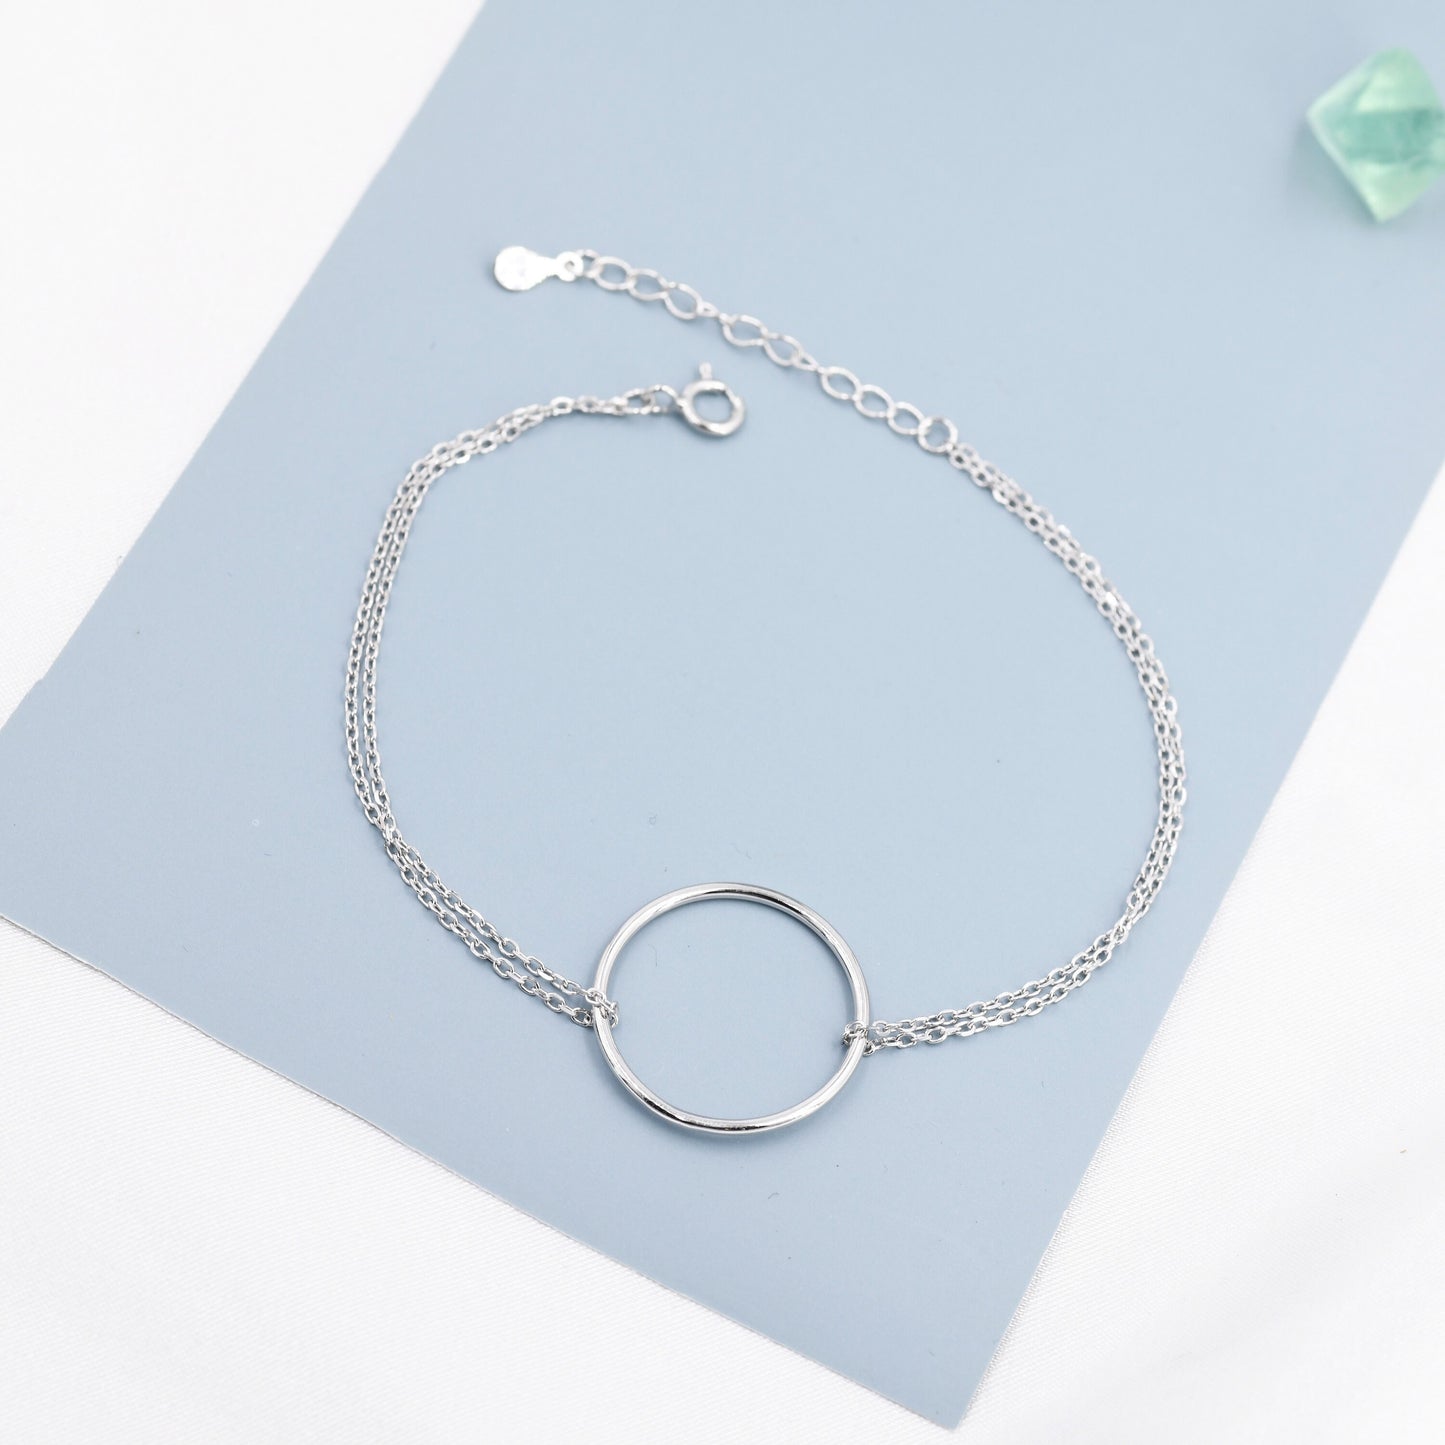 Open Circle Bracelet in Sterling Silver, Silver or Gold or Rose Gold,  Geometric Circle Bracelet, Minimalist Jewellery